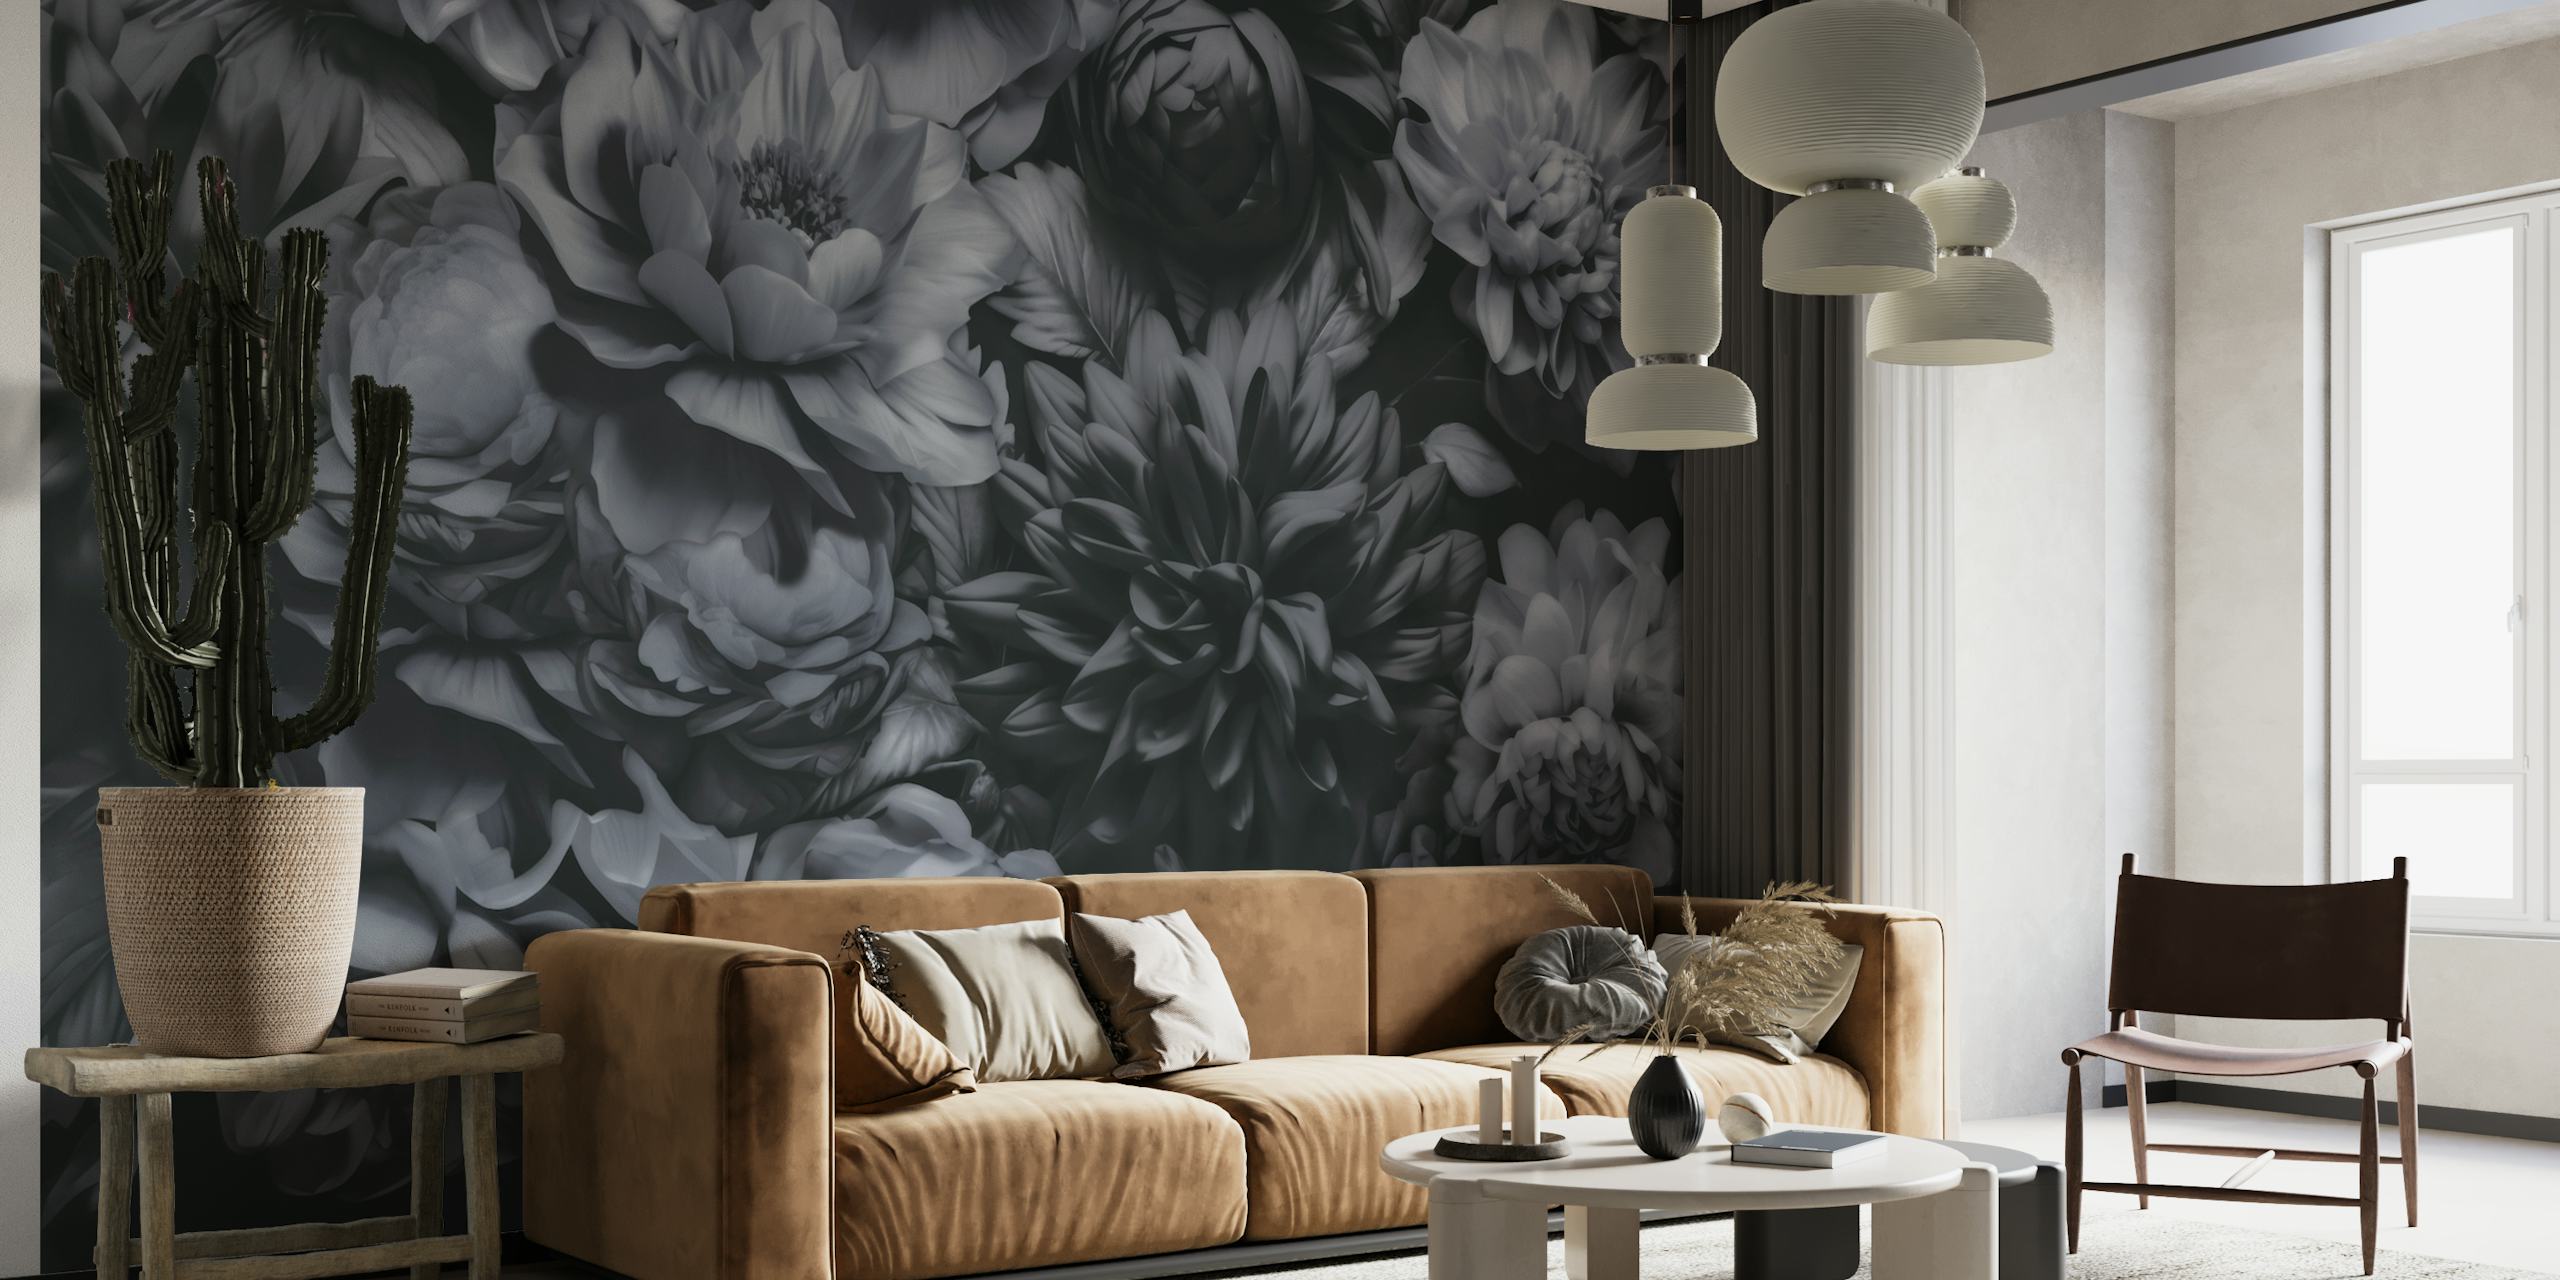 Opulent Baroque Flowers wall mural in silver-grey tones with moody botanical art design